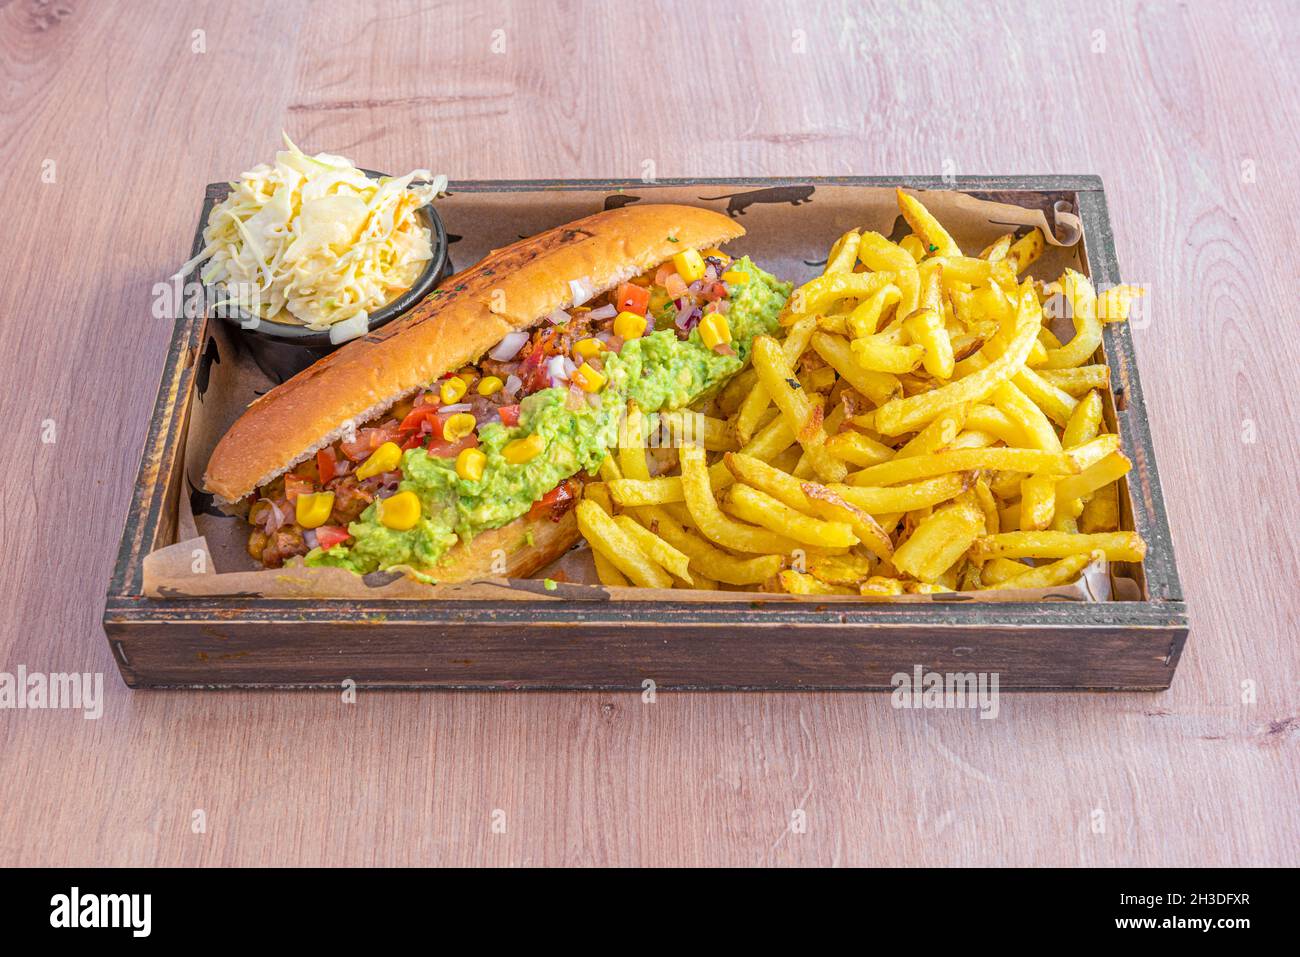 Photos of Hot Dog Cartel, Pictures of Hot Dog Cartel, Pune